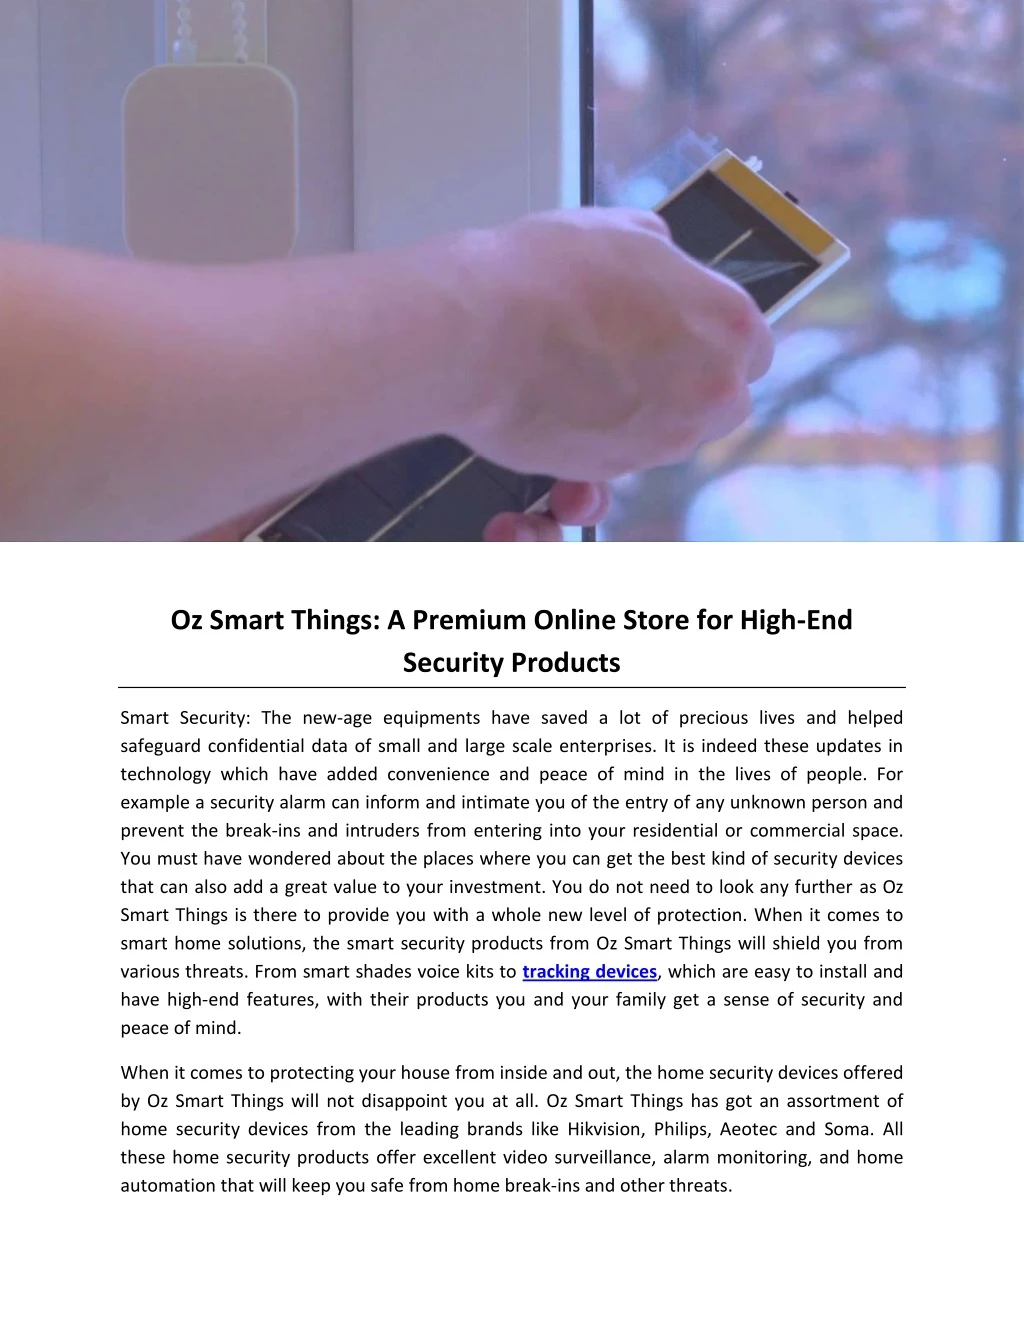 oz smart things a premium online store for high